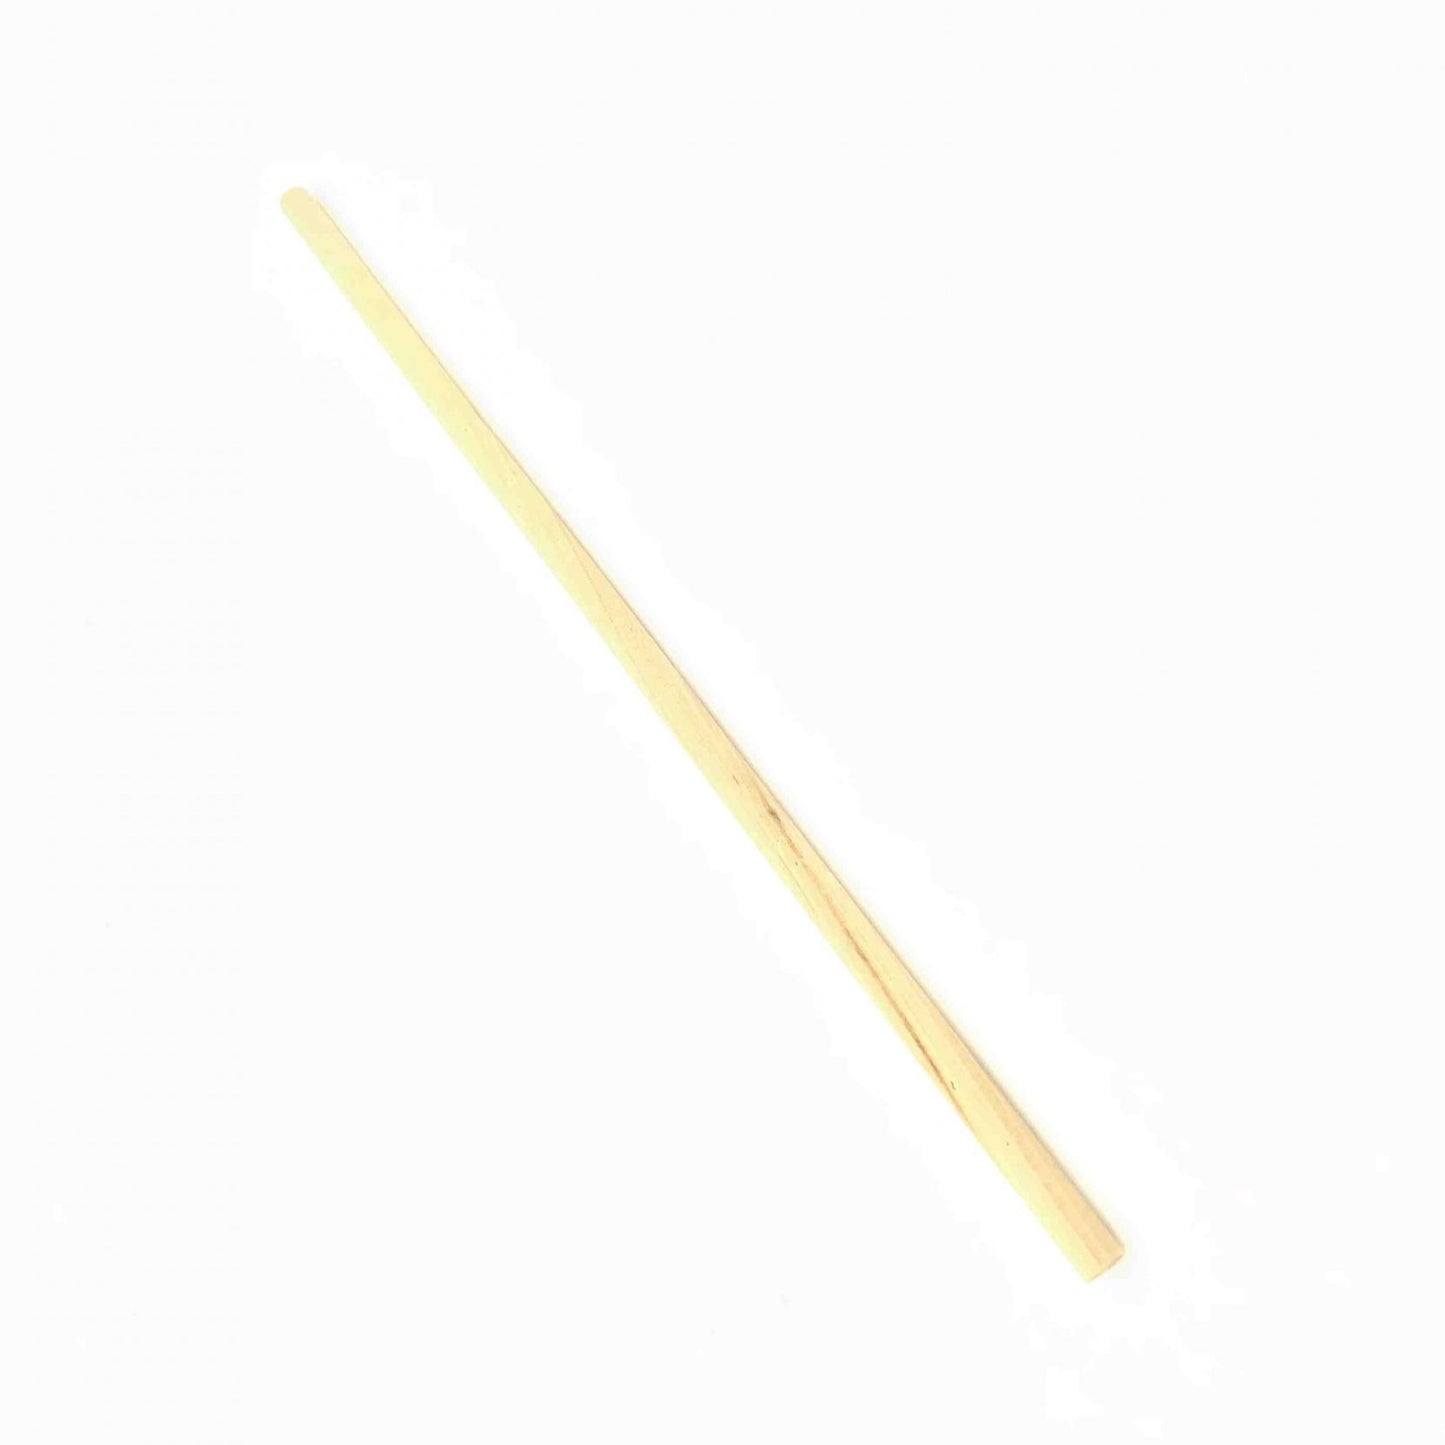 Wooden Round Stirrer Lolly Pop Stick (19cm) - 100 pieces - Canape King